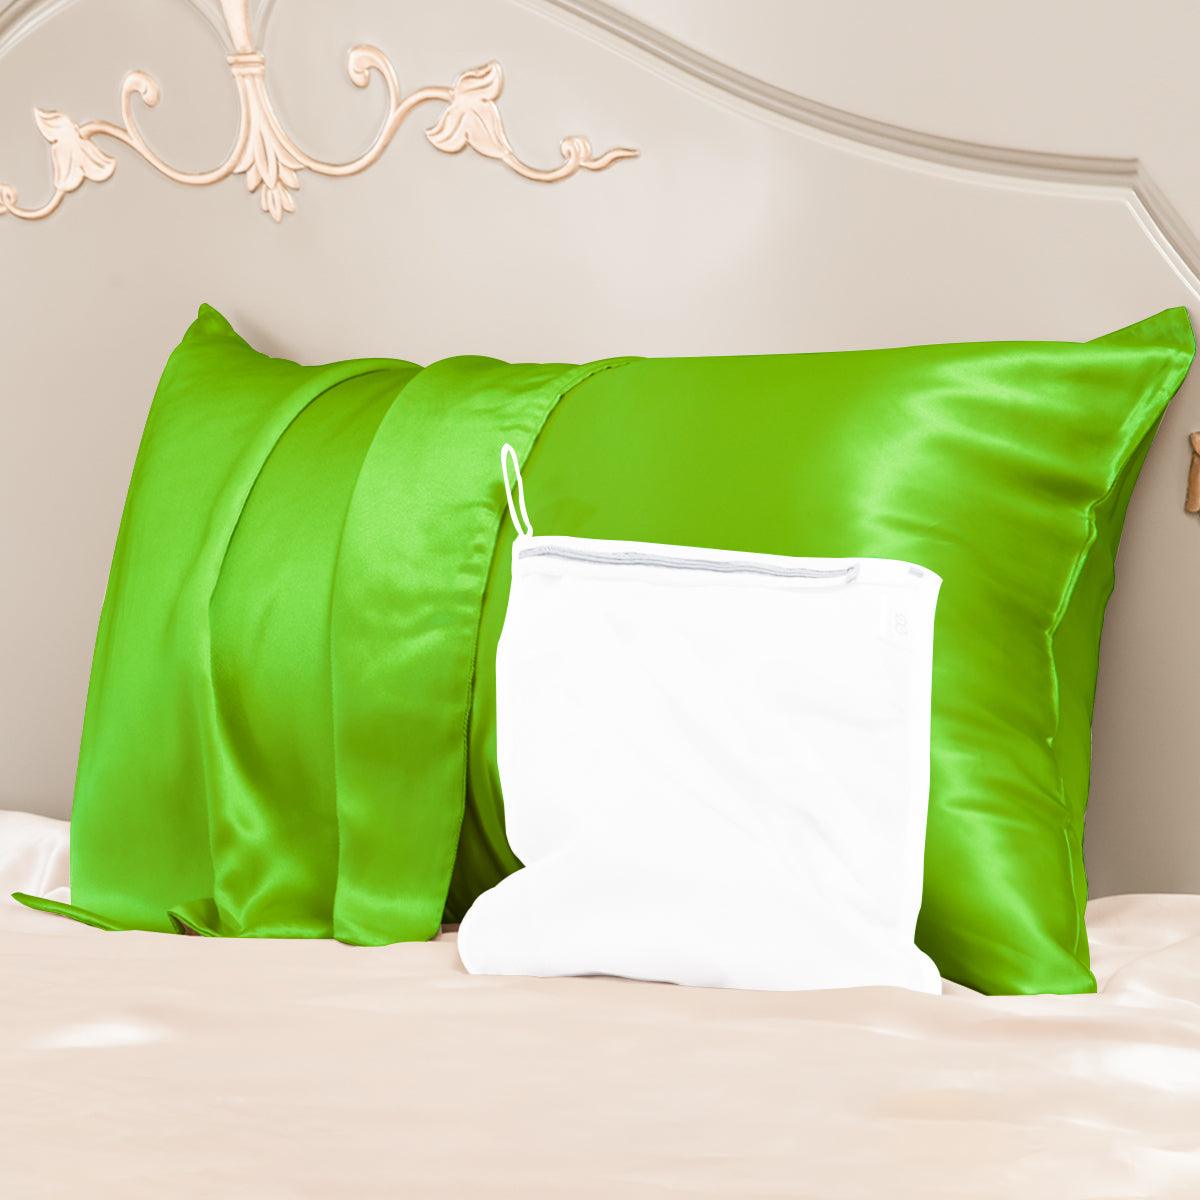 23mm 6A+ Silk Pillowcase With Zipper With Laundry Bag - promeedsilk